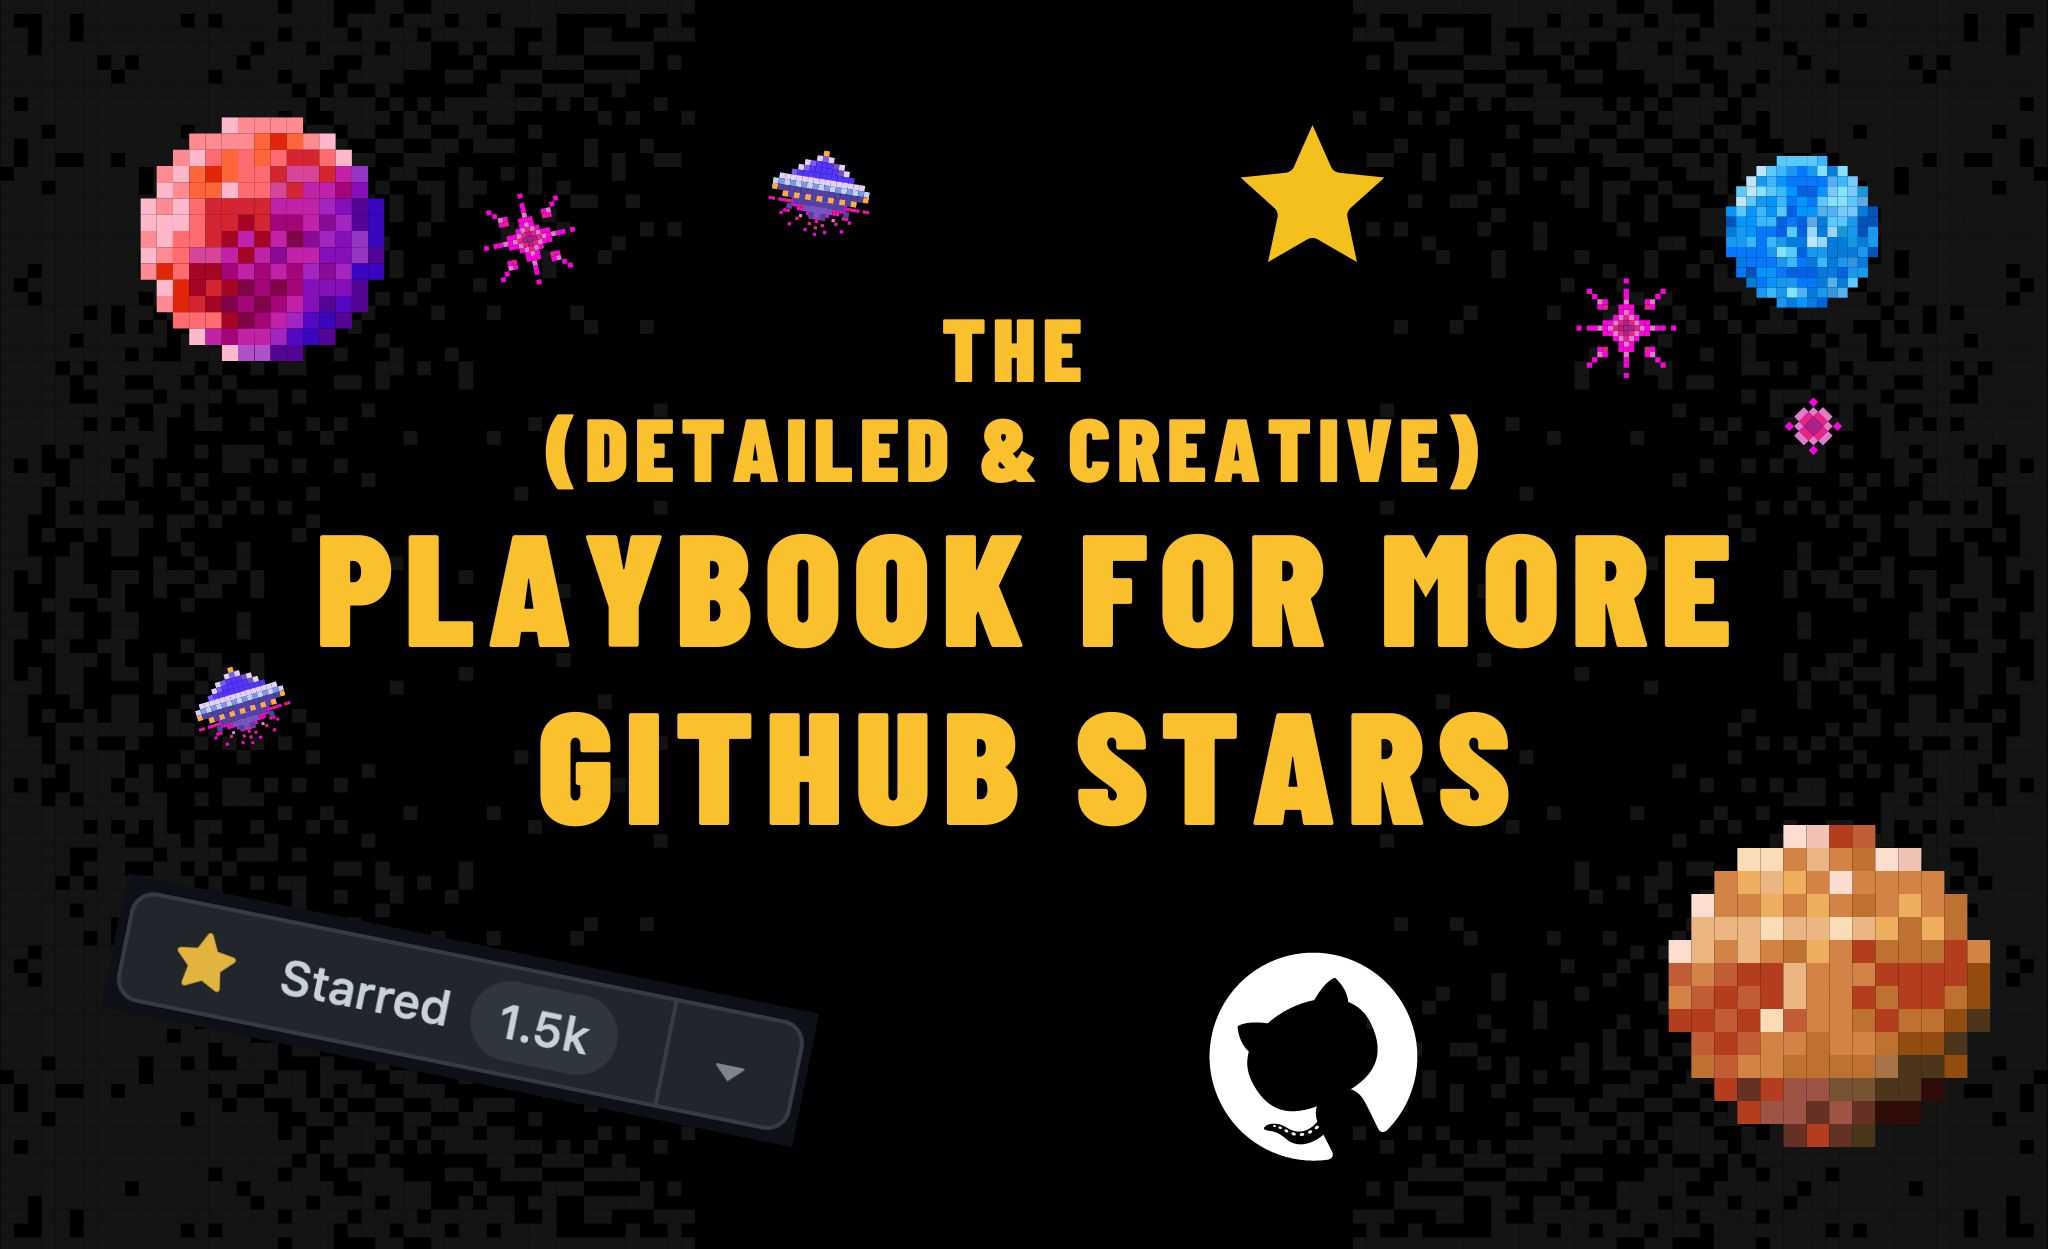 The Creative & Detailed Playbook to Get More GitHub Stars